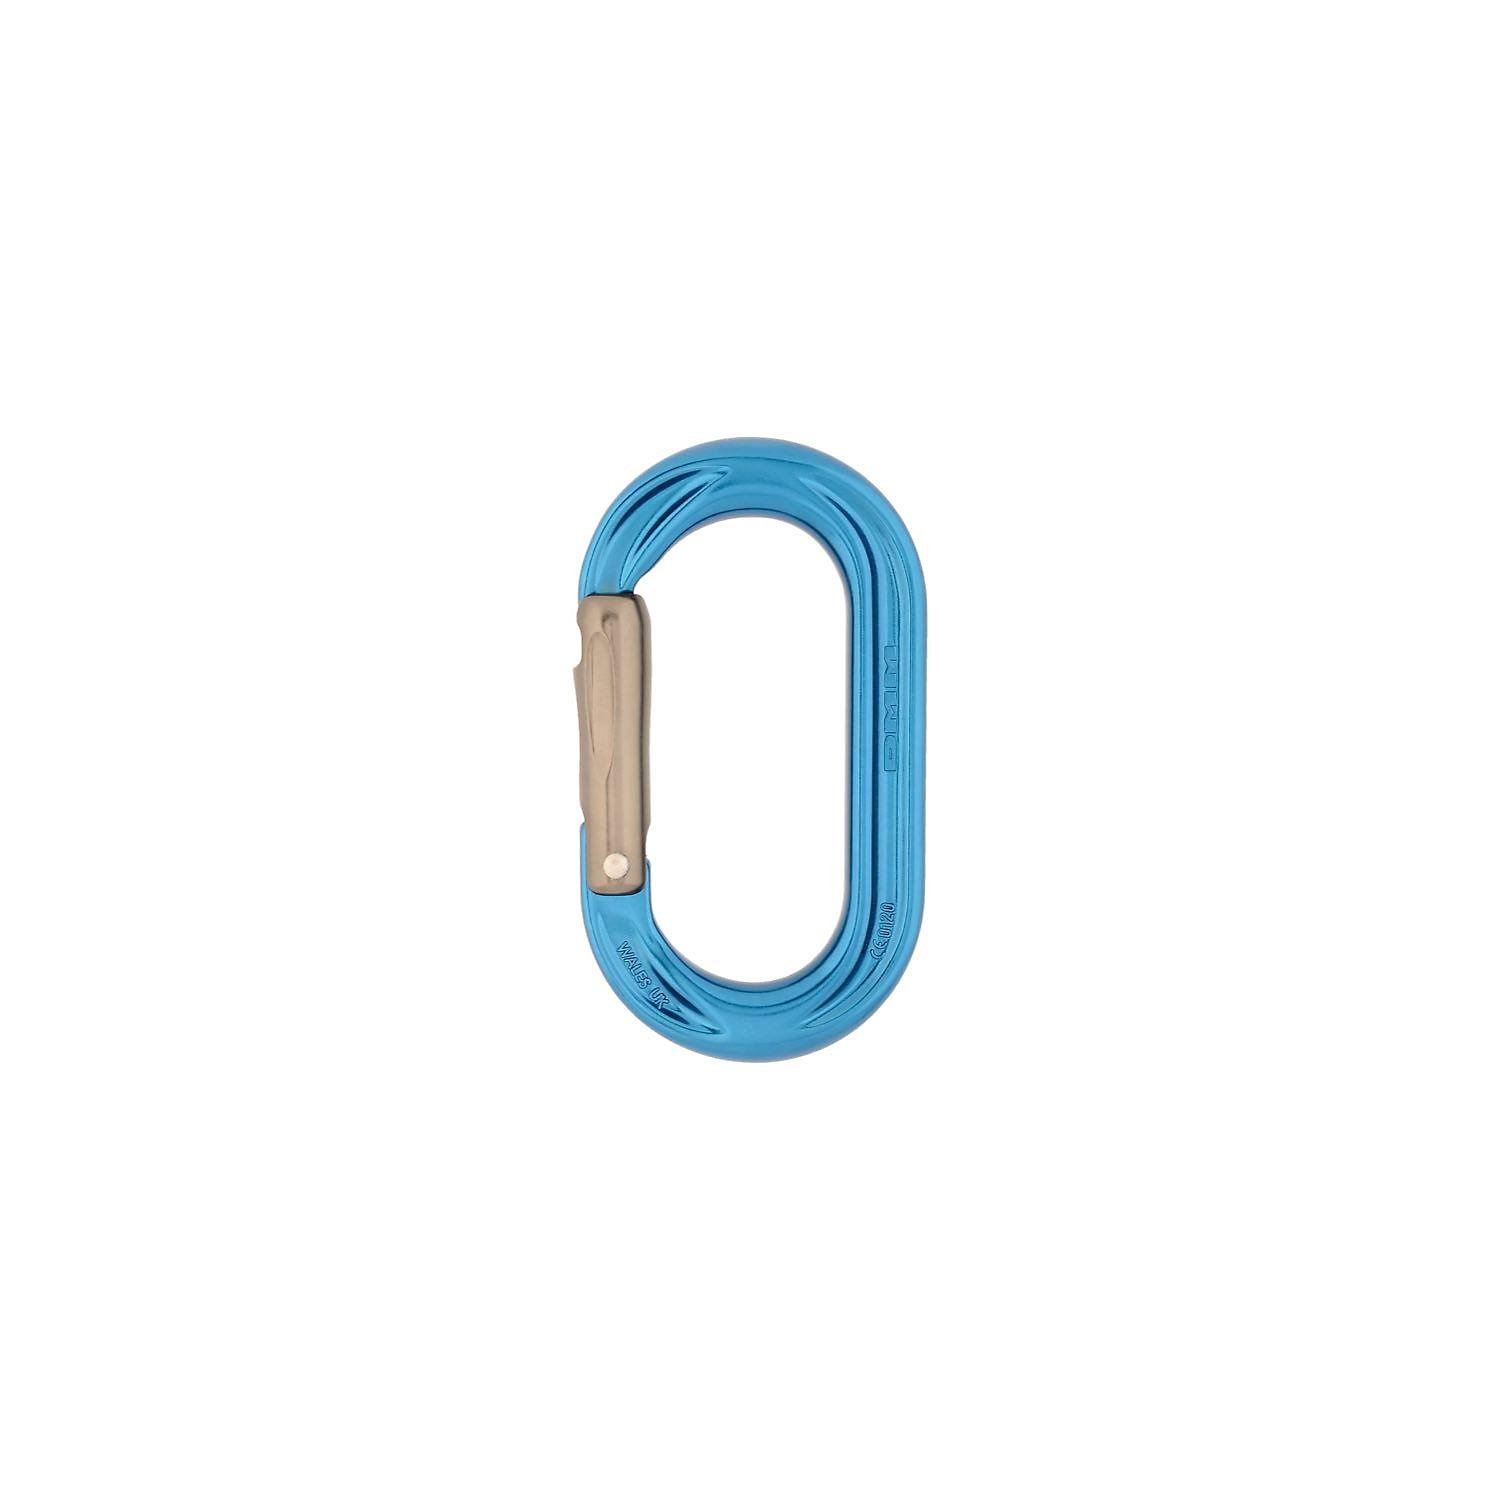 DMM PerfectO Straight Gate Carabiner